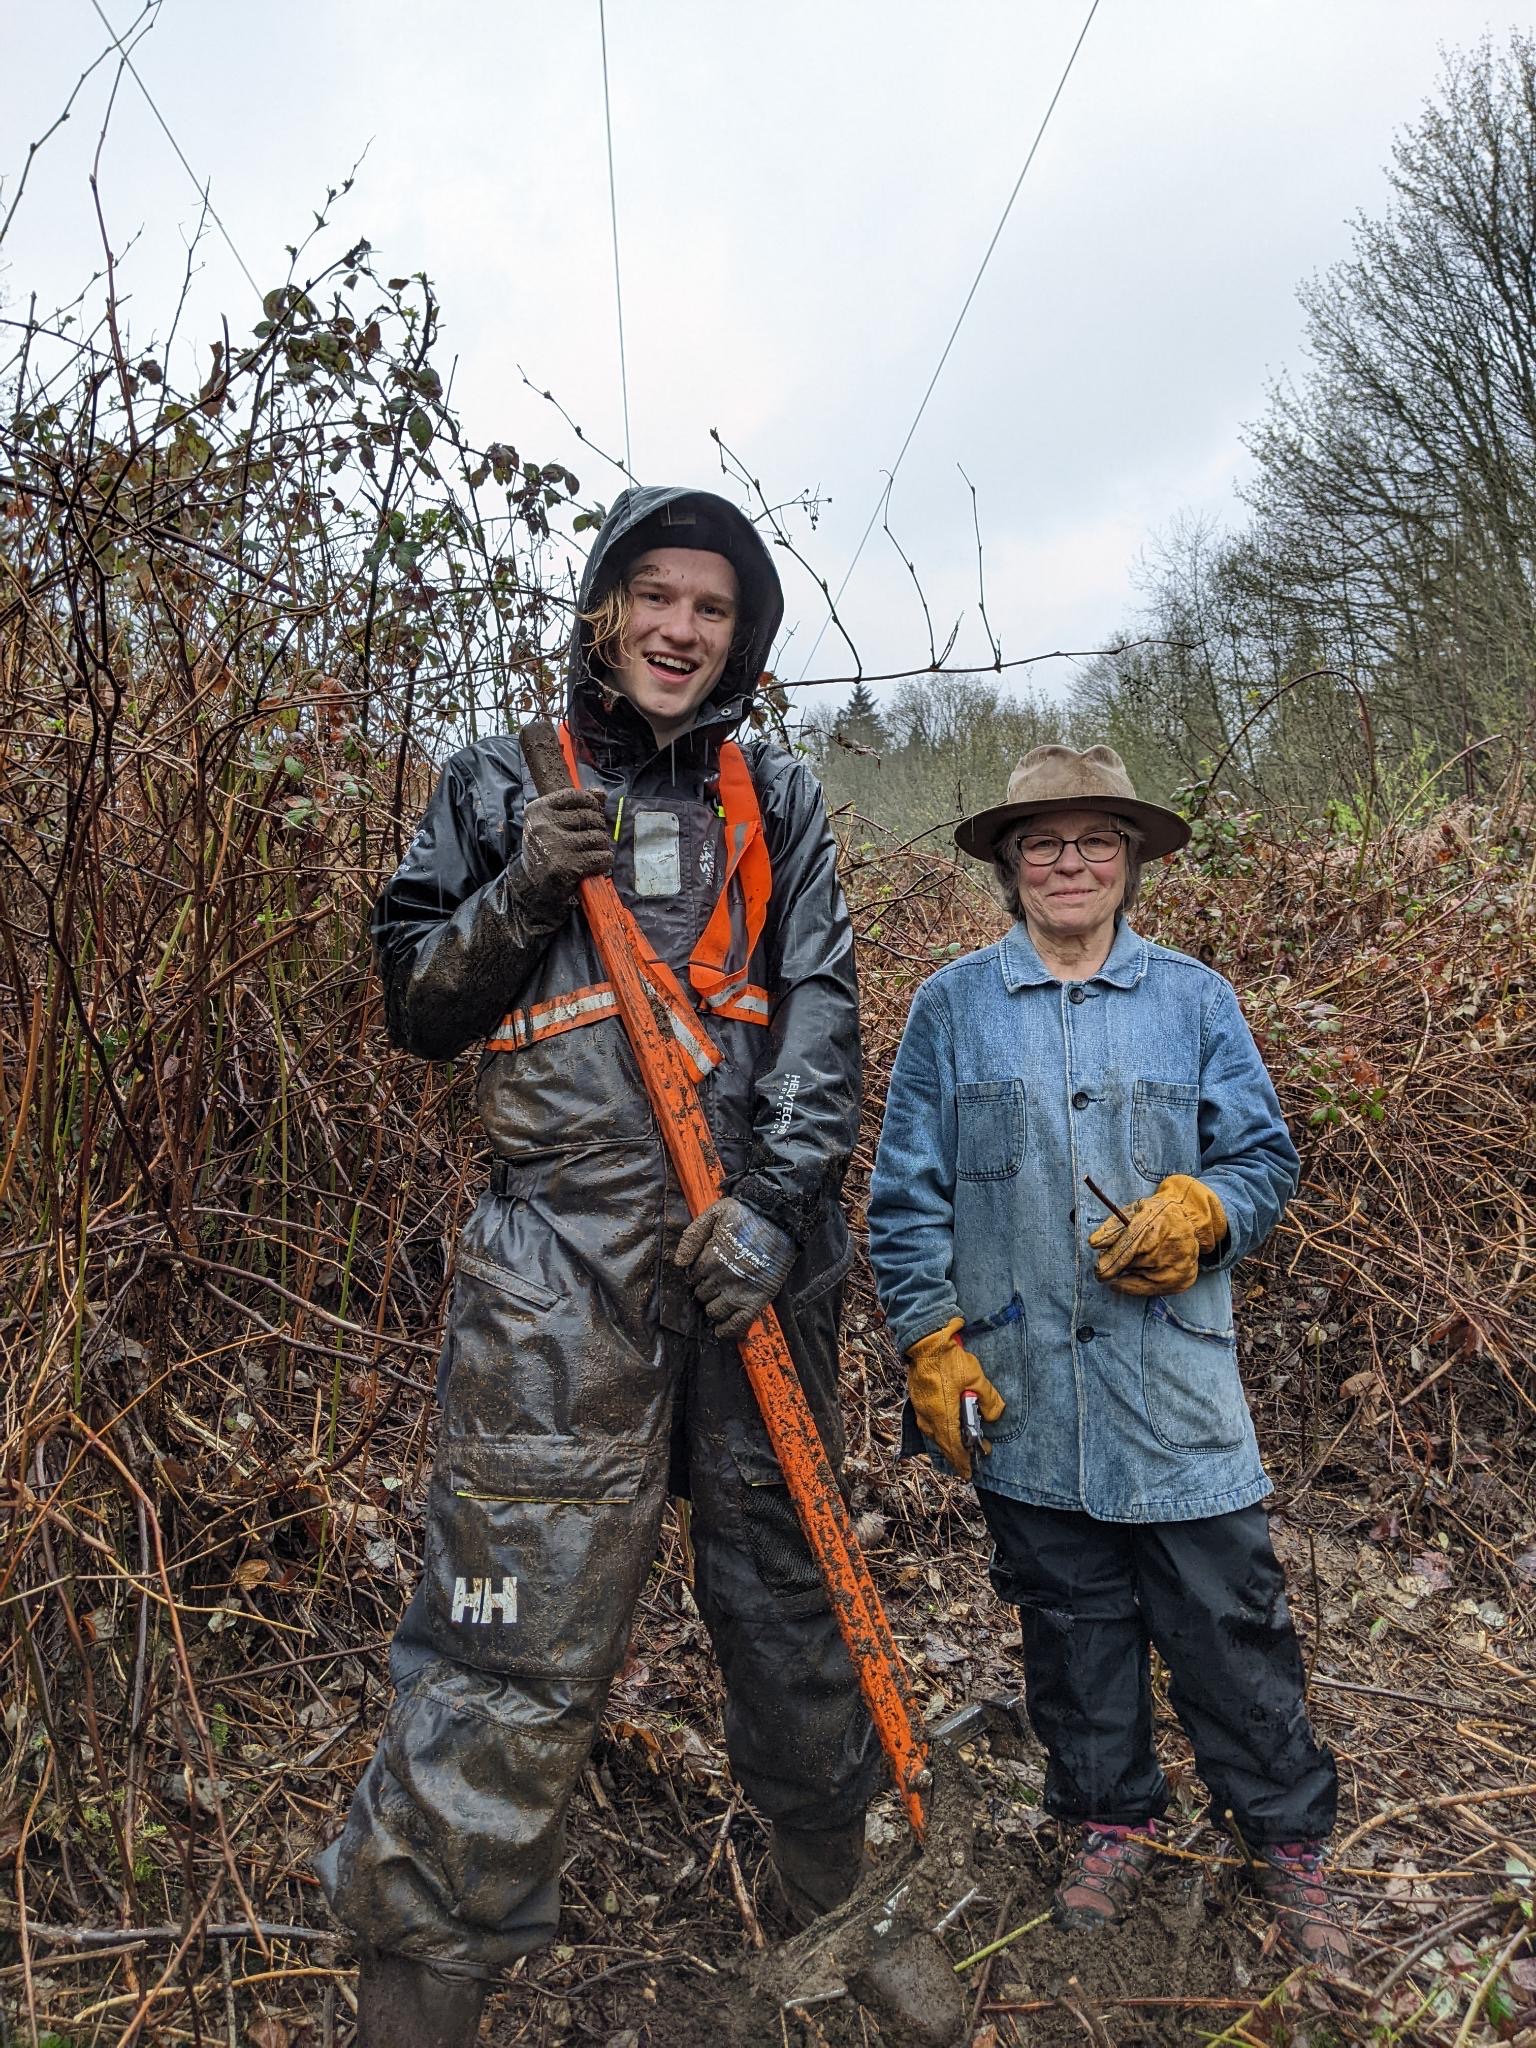 A muddy Matthew and a volunteer pose at the Rubus Restoration worksite removing blackberry